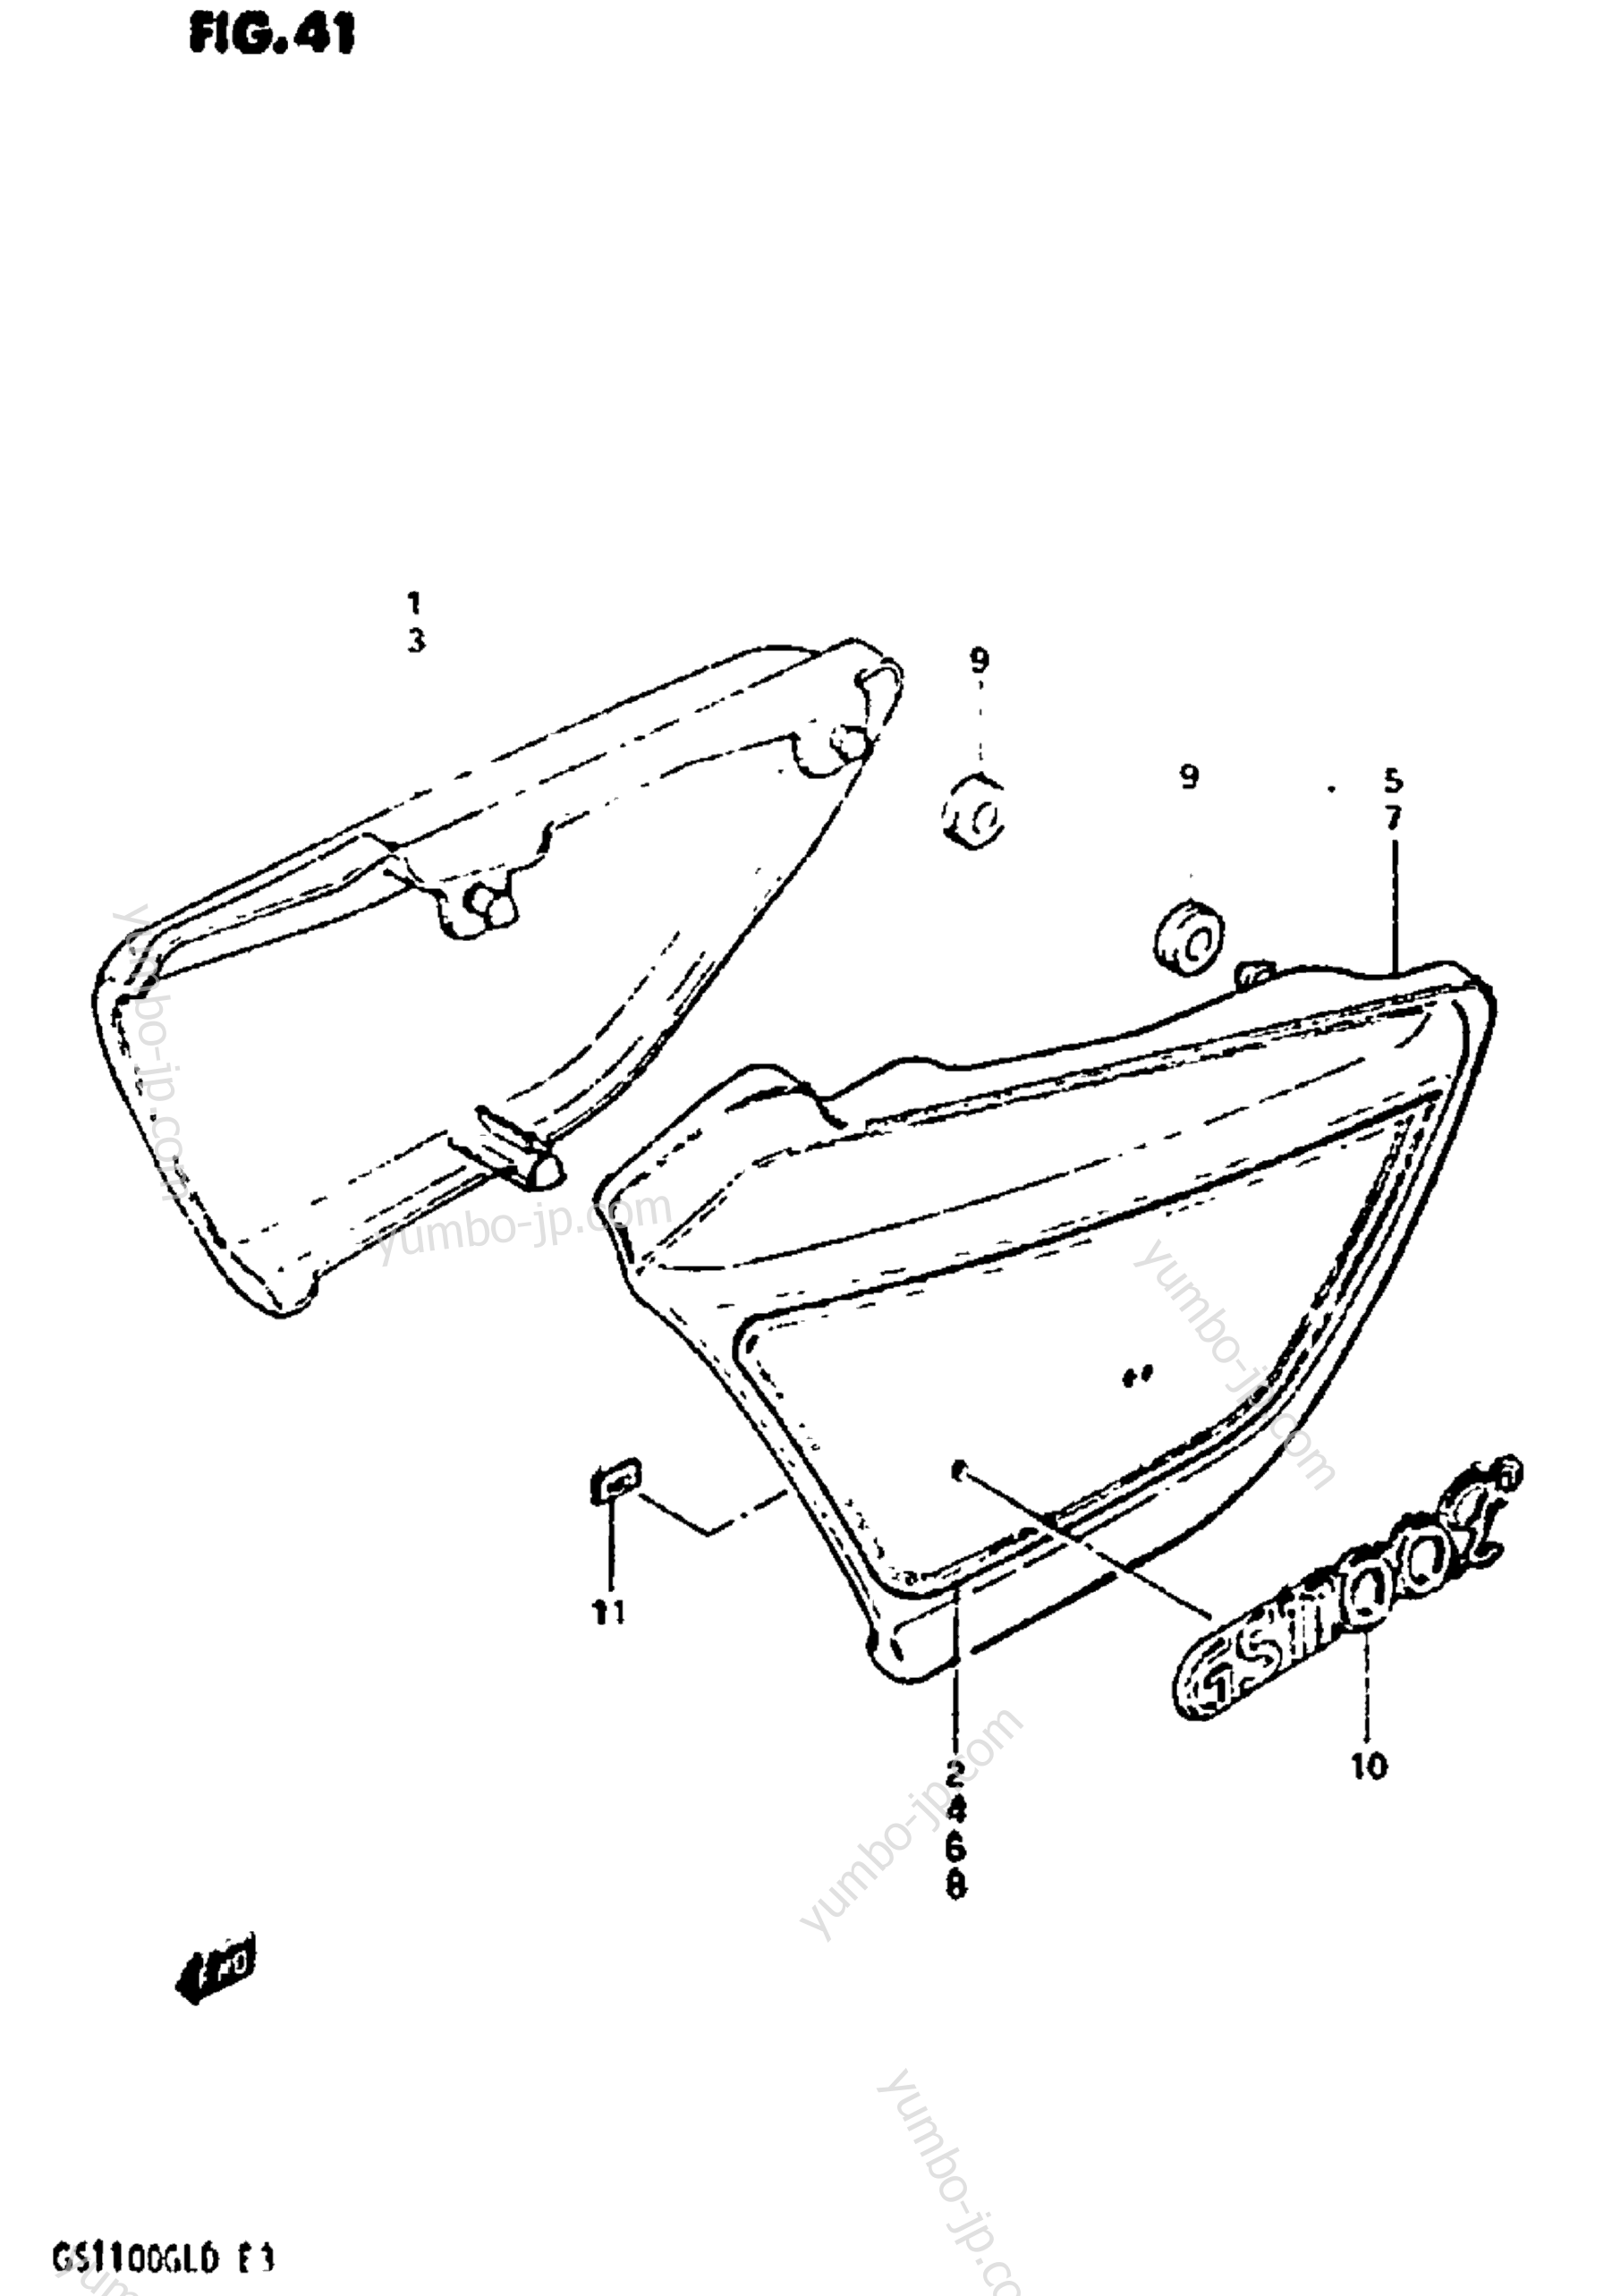 FRAME COVER (MODEL D) for motorcycles SUZUKI GS1100GL 1982 year